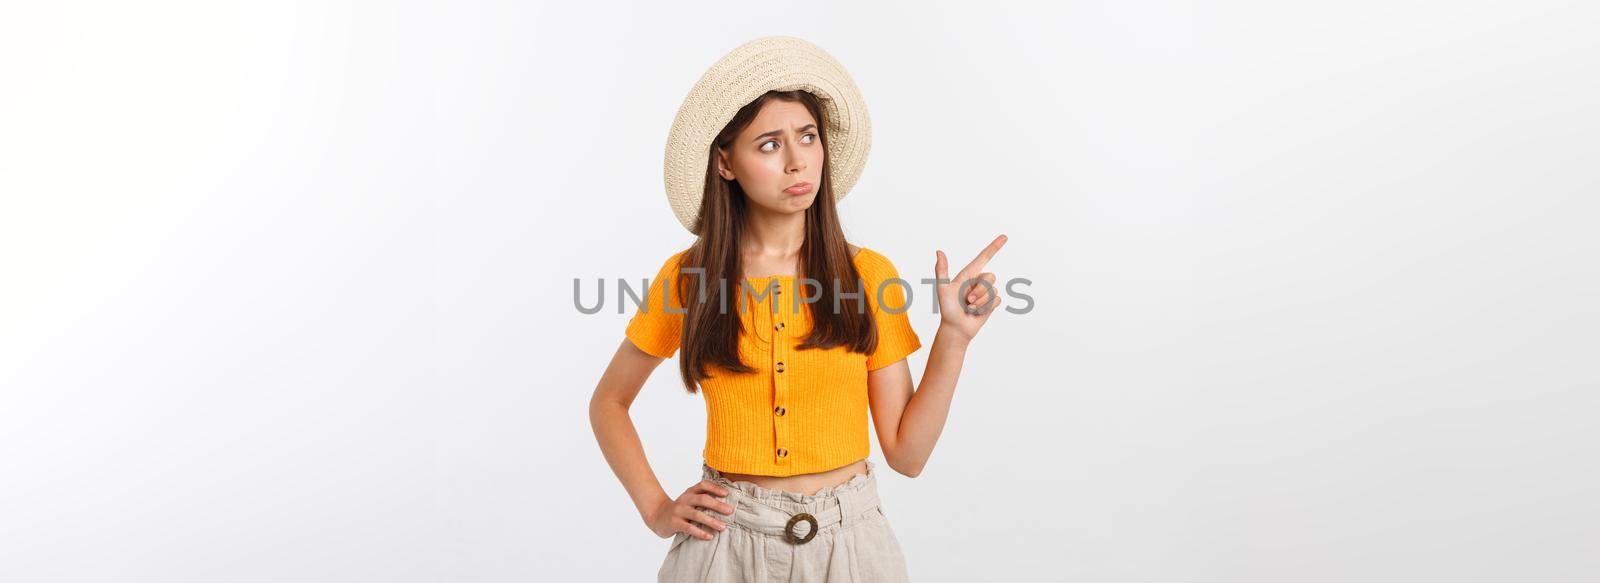 young pretty woman looking unhappy and stressed, suicide gesture making gun sign with hand, pointing to copy space